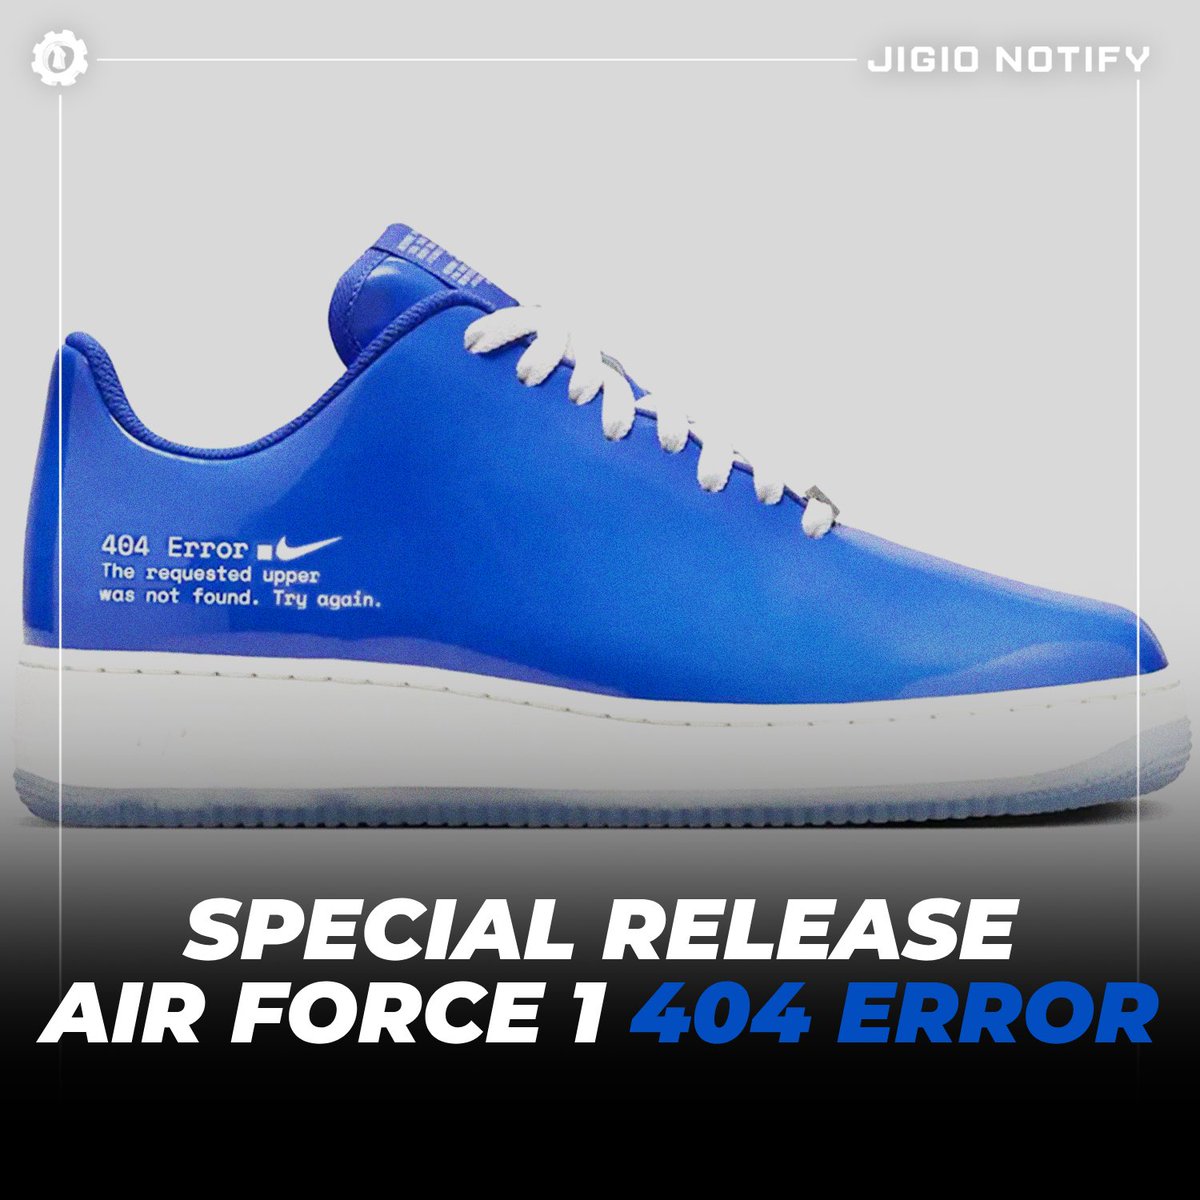 Tomorrow there will be a special launch of Nike Air Force 1 Swoosh 404 error. You need to be a member of swoosh, our users have already registered for a long time and you? linktr.ee/jigionotify